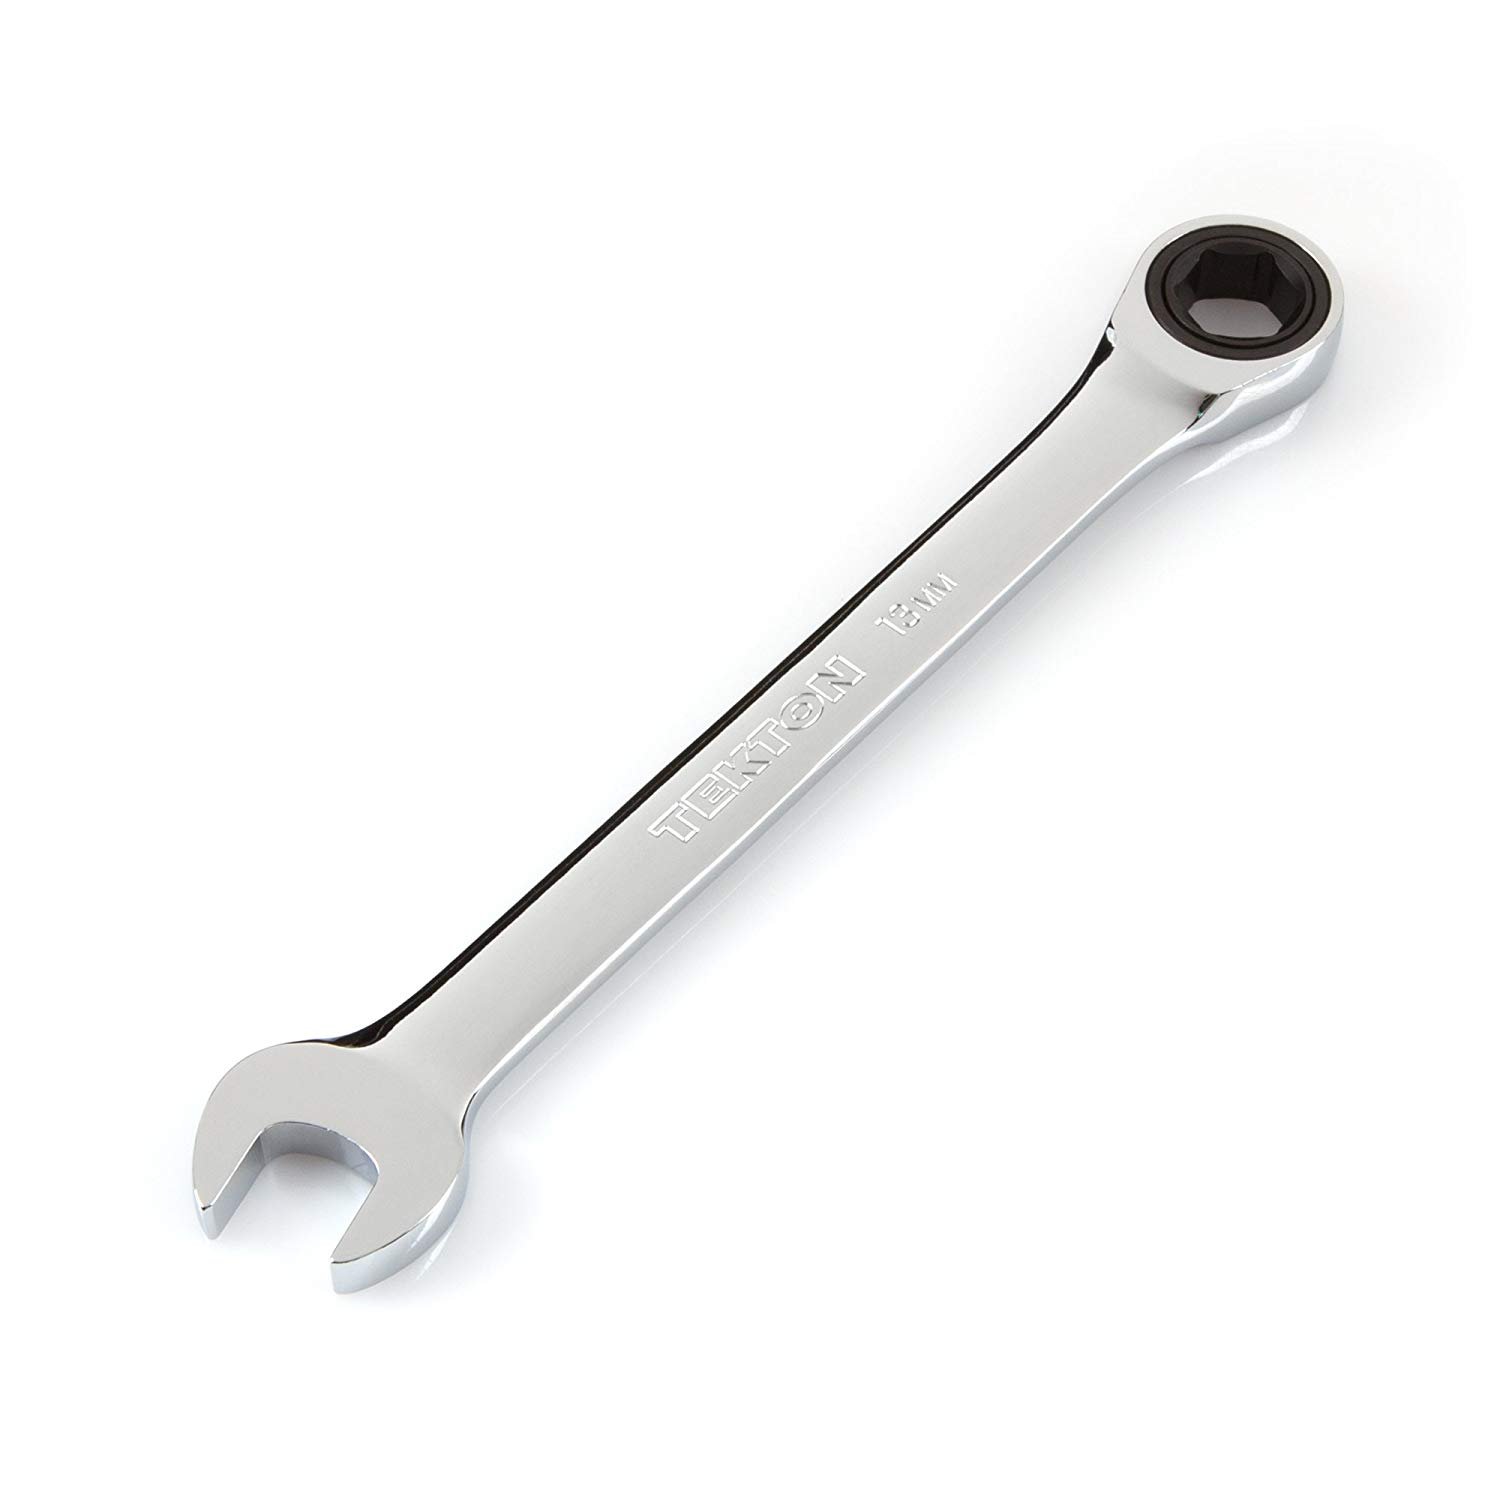 RATCHET COMBINATION WRENCH 13MM